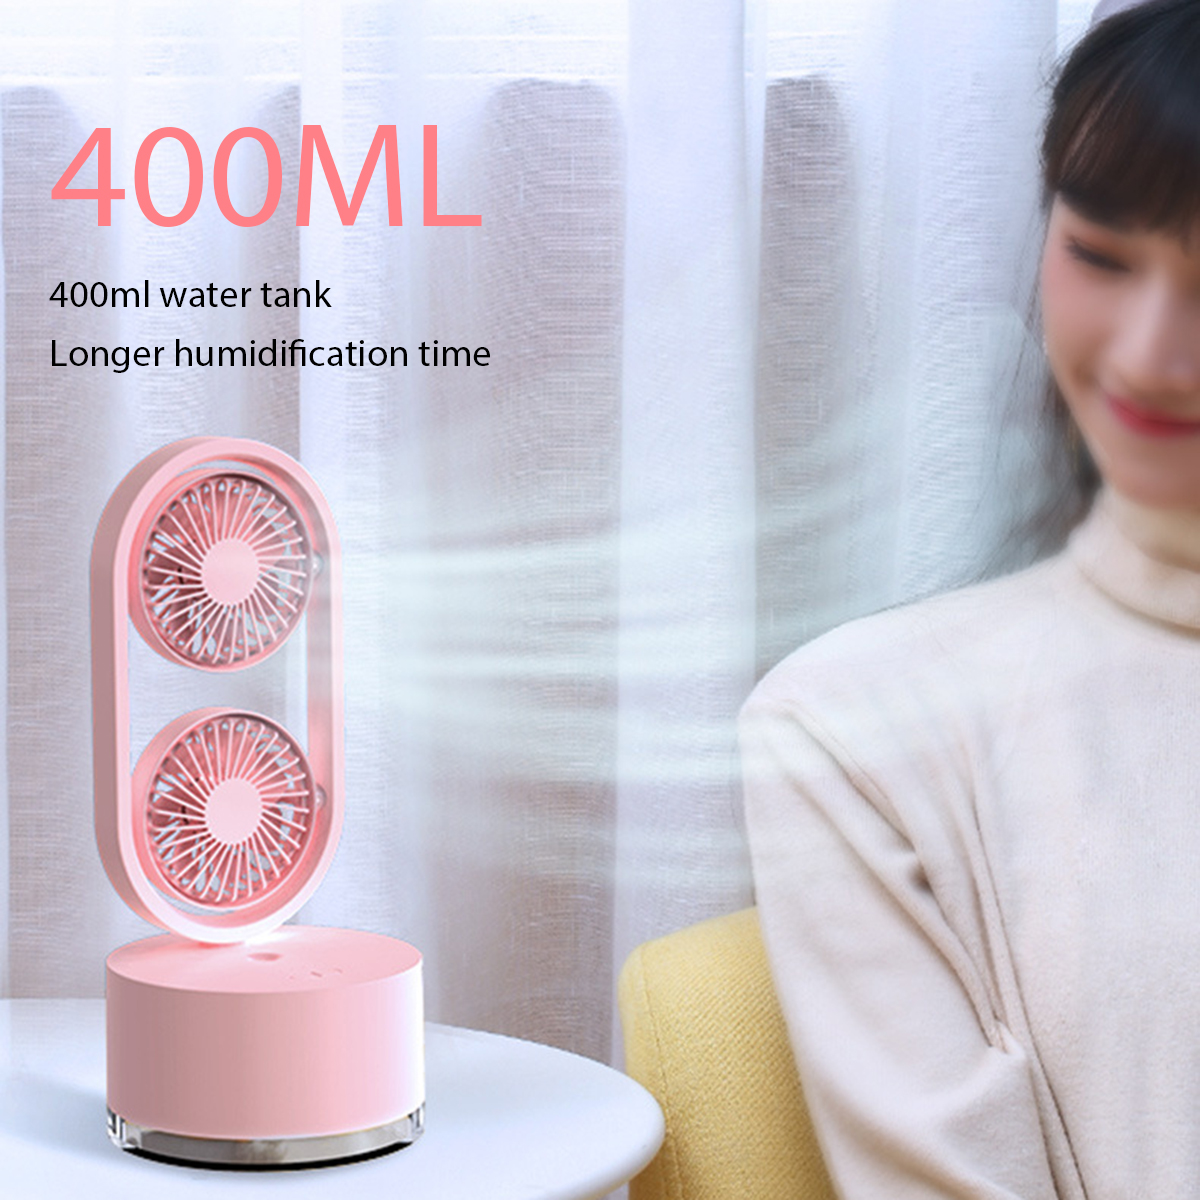 Mini-Dual-Head-Fan-3-Speeds-USB-Rechargeable-Air-Condition-Fan-400ml-Water-Tank-Spray-Humidification-1846006-7